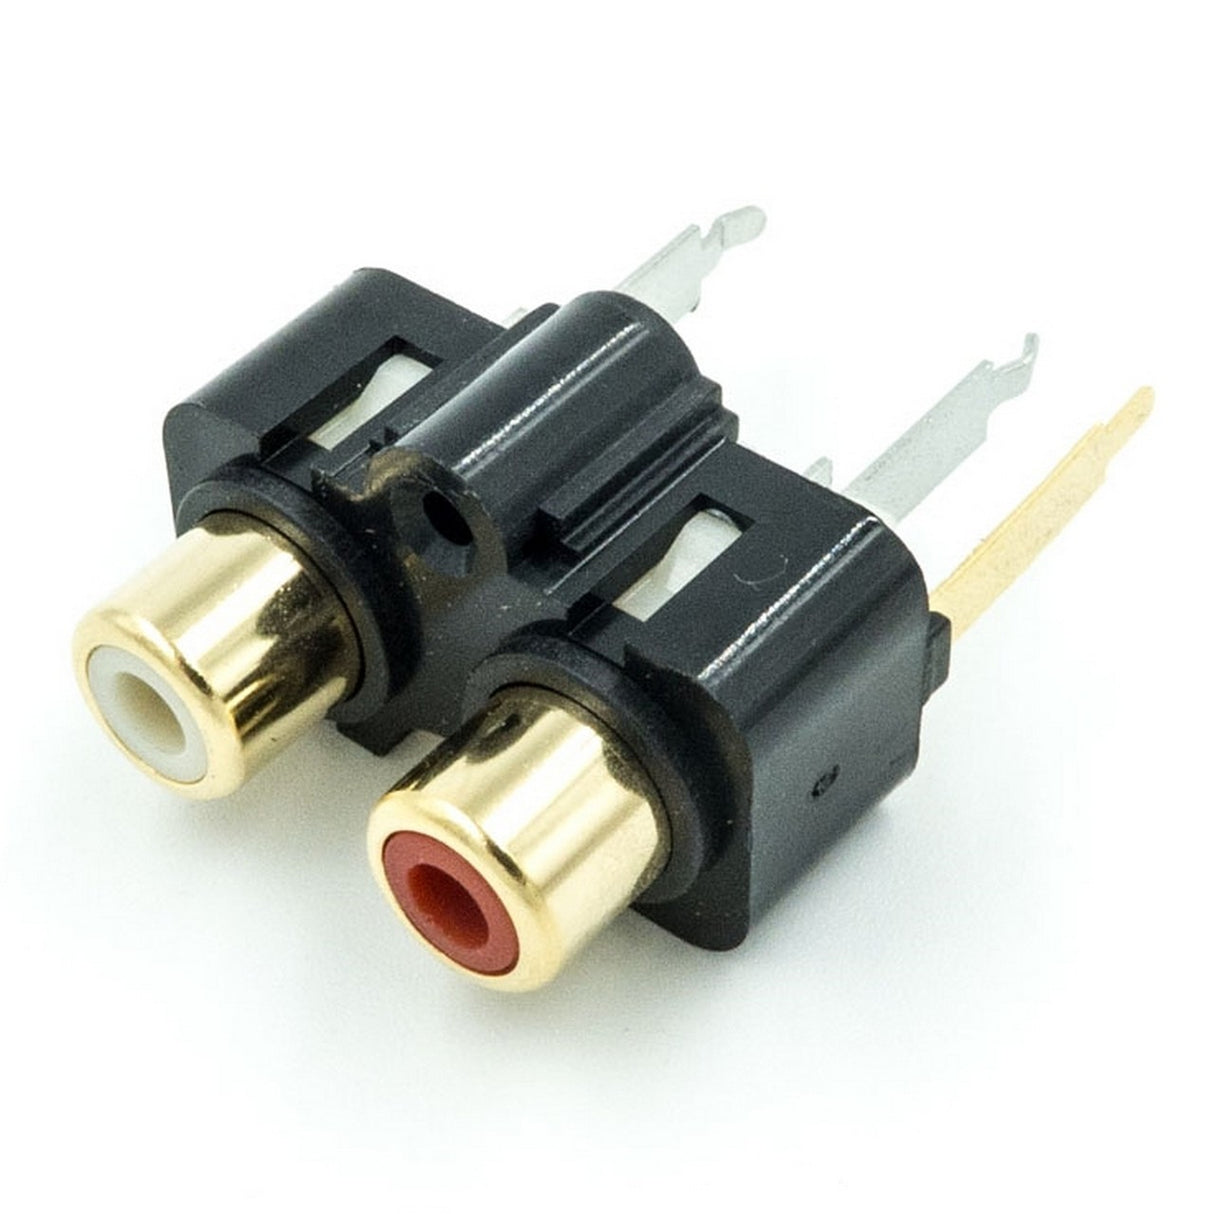 QSC CO-000371-00 RCA Stereo Connector for K12, Single Unit